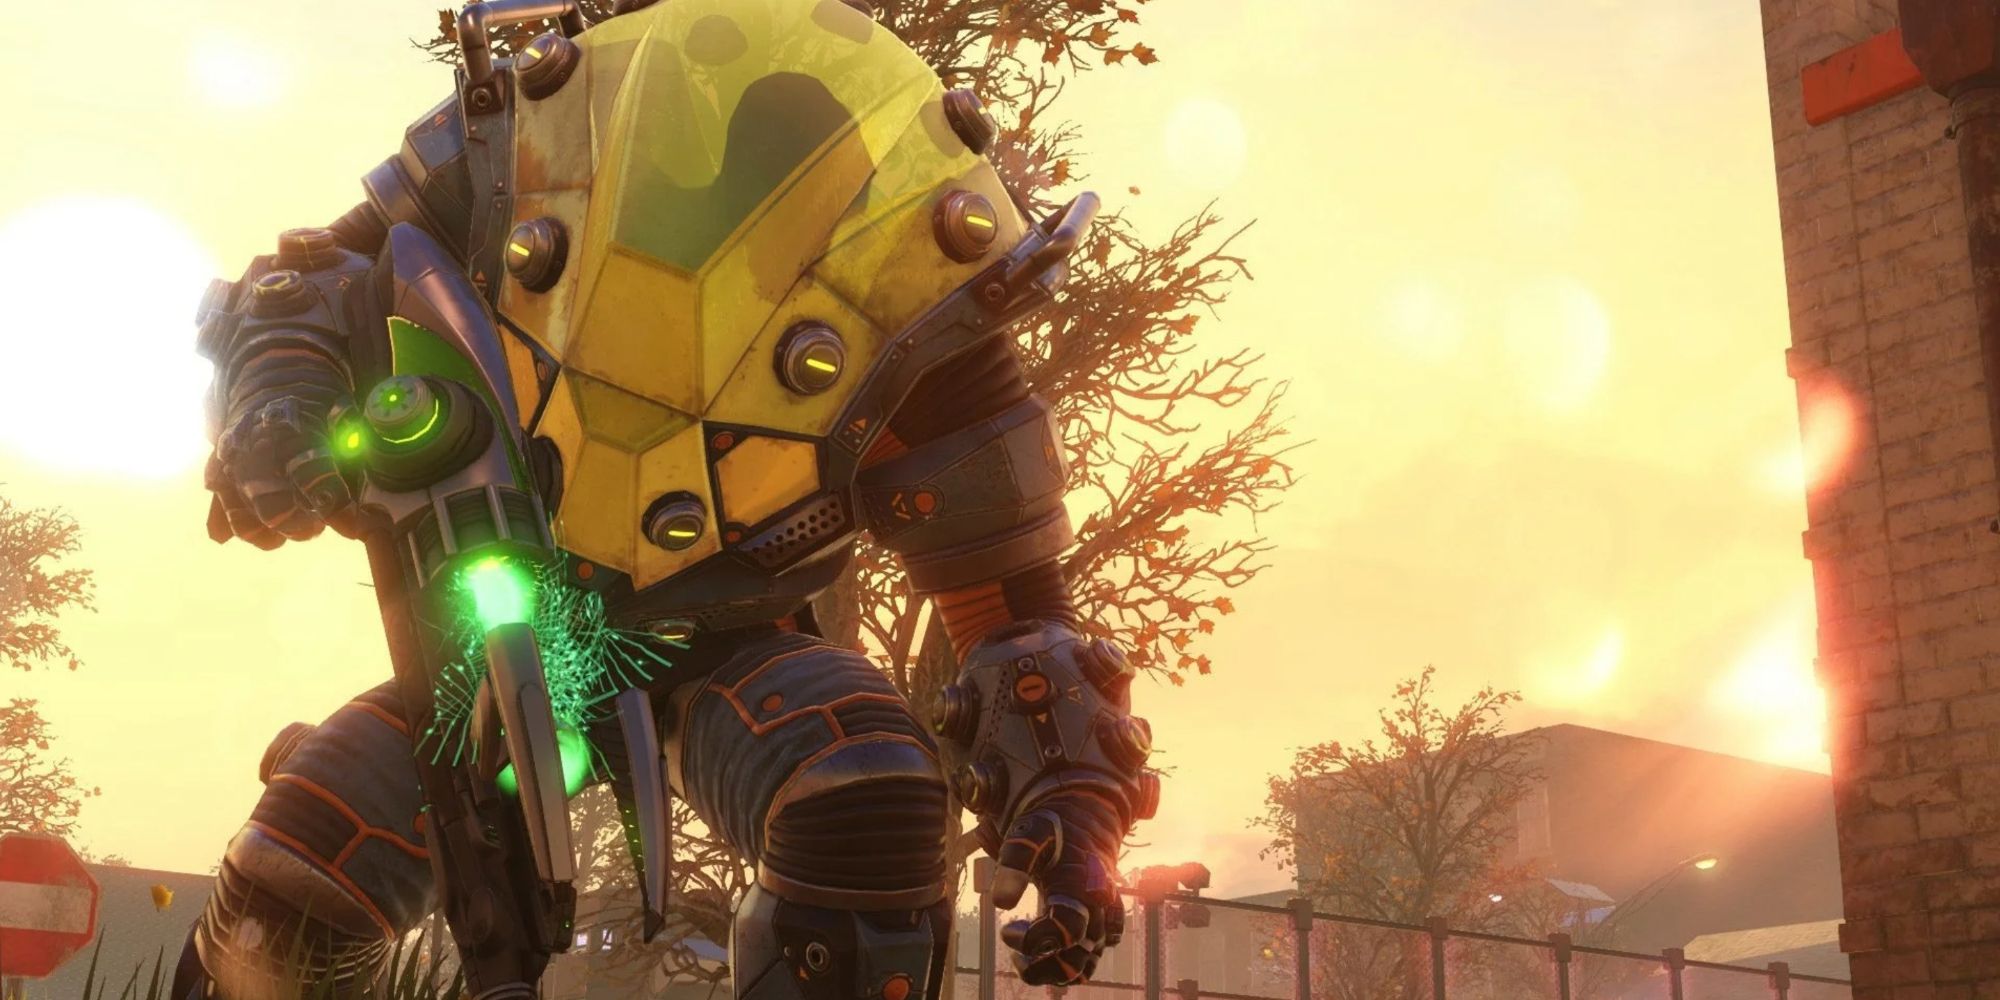 An Andromedon in a Battlesuit in a battle stance in XCOM 2 